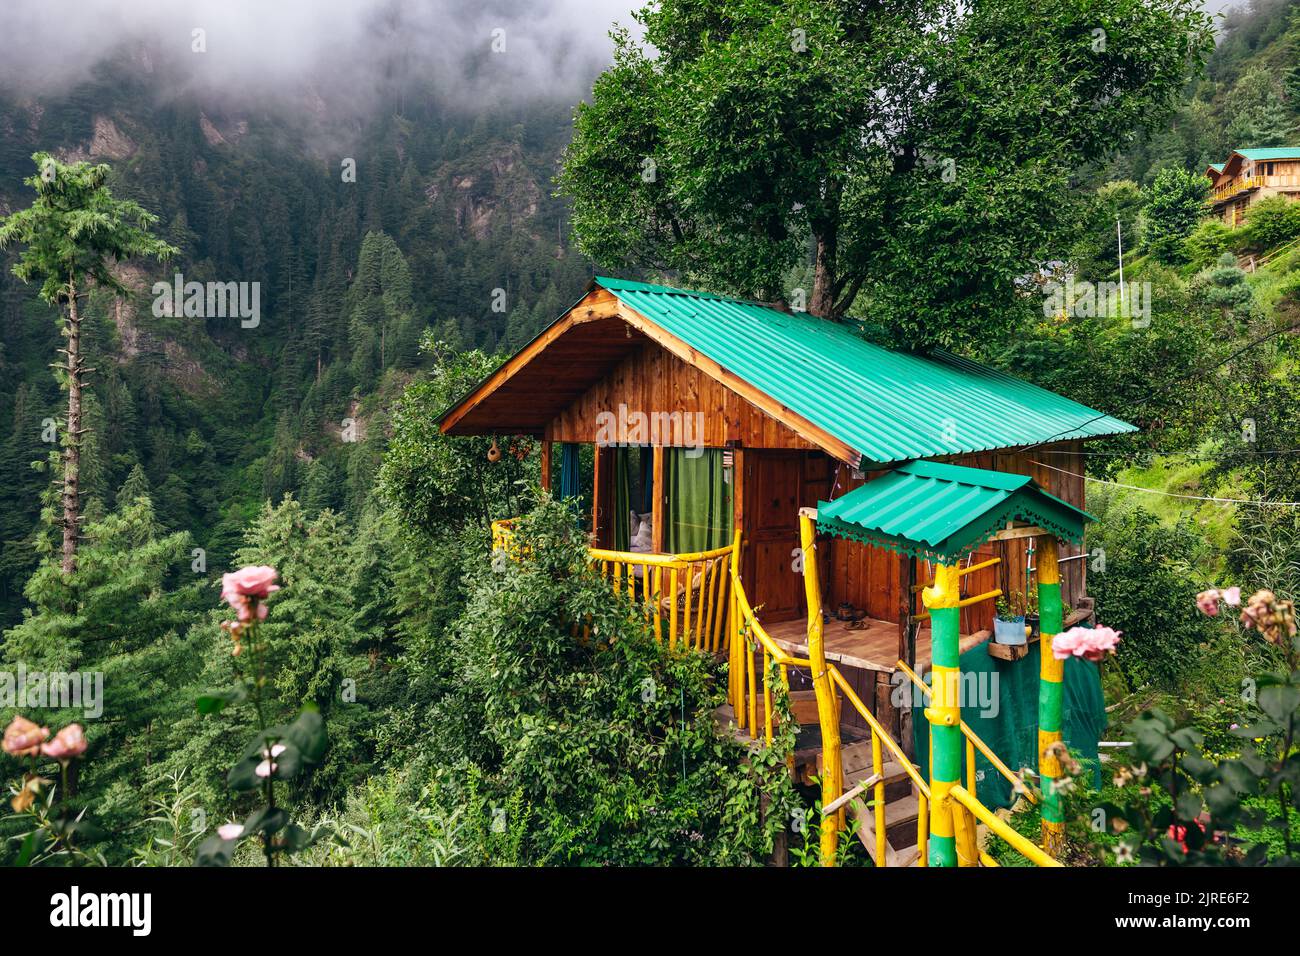 Magical wooden treehouse in the mountains of Jibhi India with moody clouds and cedar trees Stock Photo